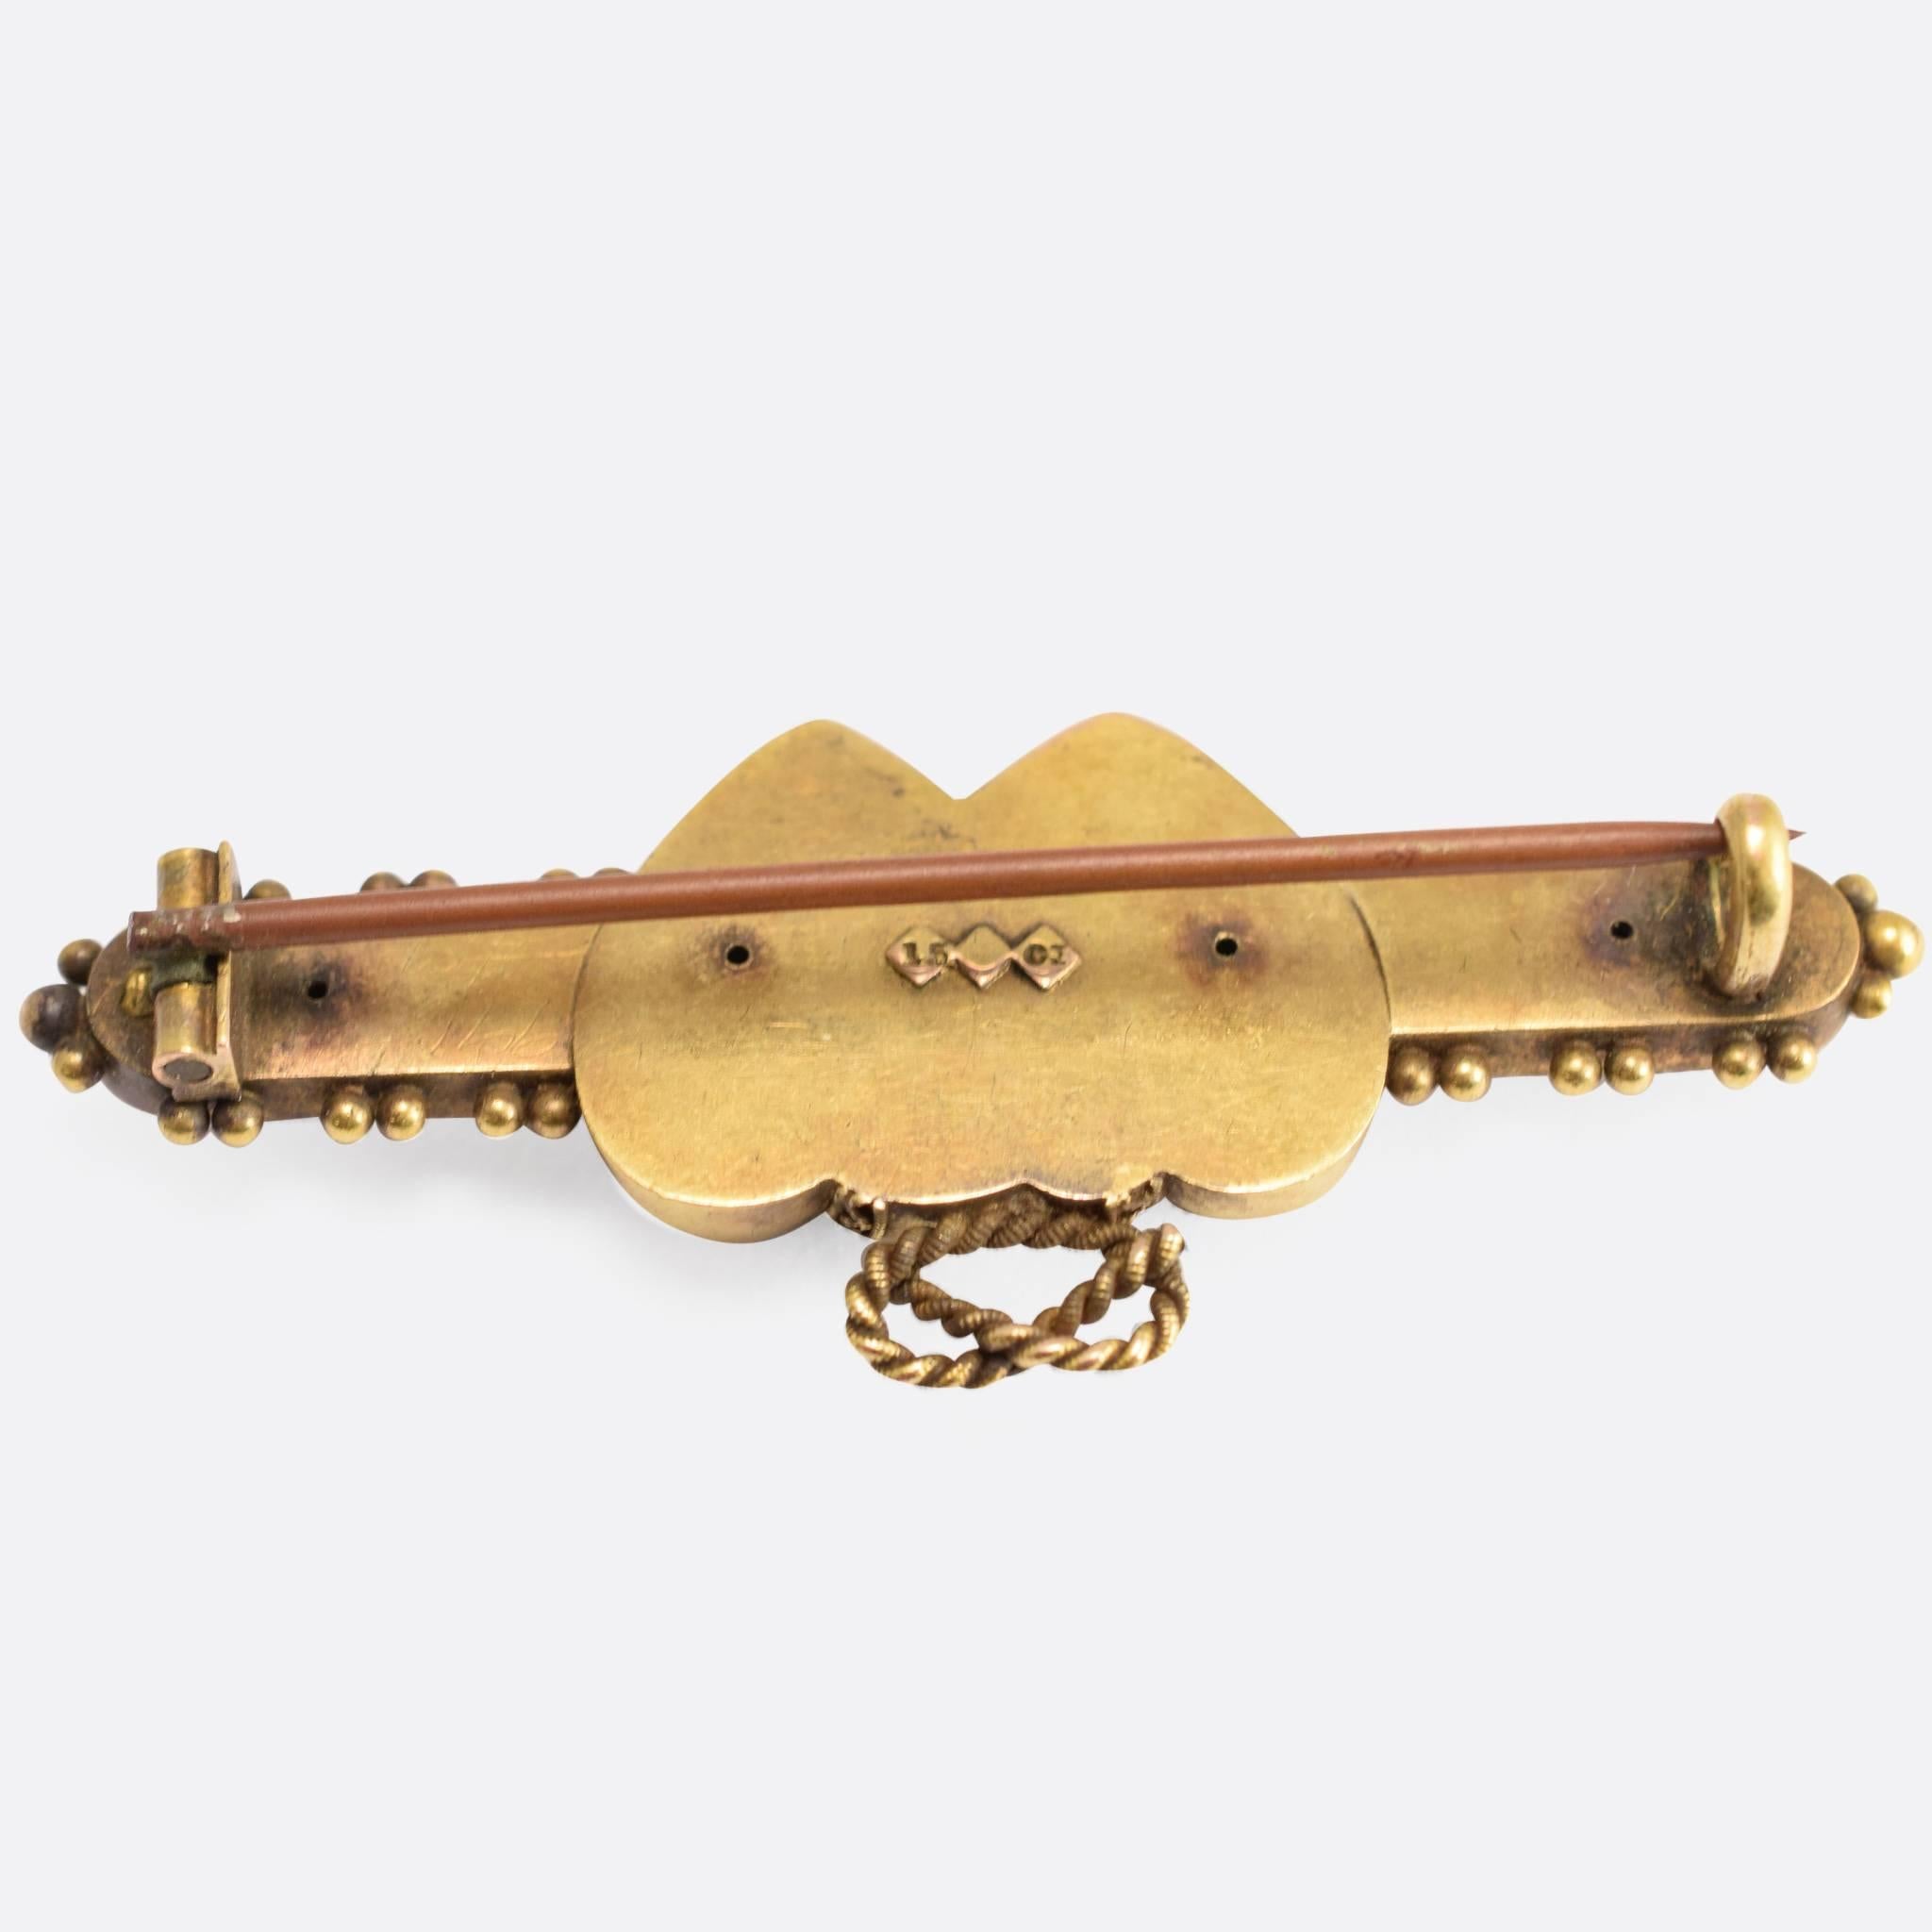 This lovely antique brooch is modelled in 15ct gold, with a Double Heart centrepiece crowned with a Lover's Knot. There is Etruscan-style applied gold detail throughout, with coiled rope and pommels. An old cut diamond is nestled in the space where